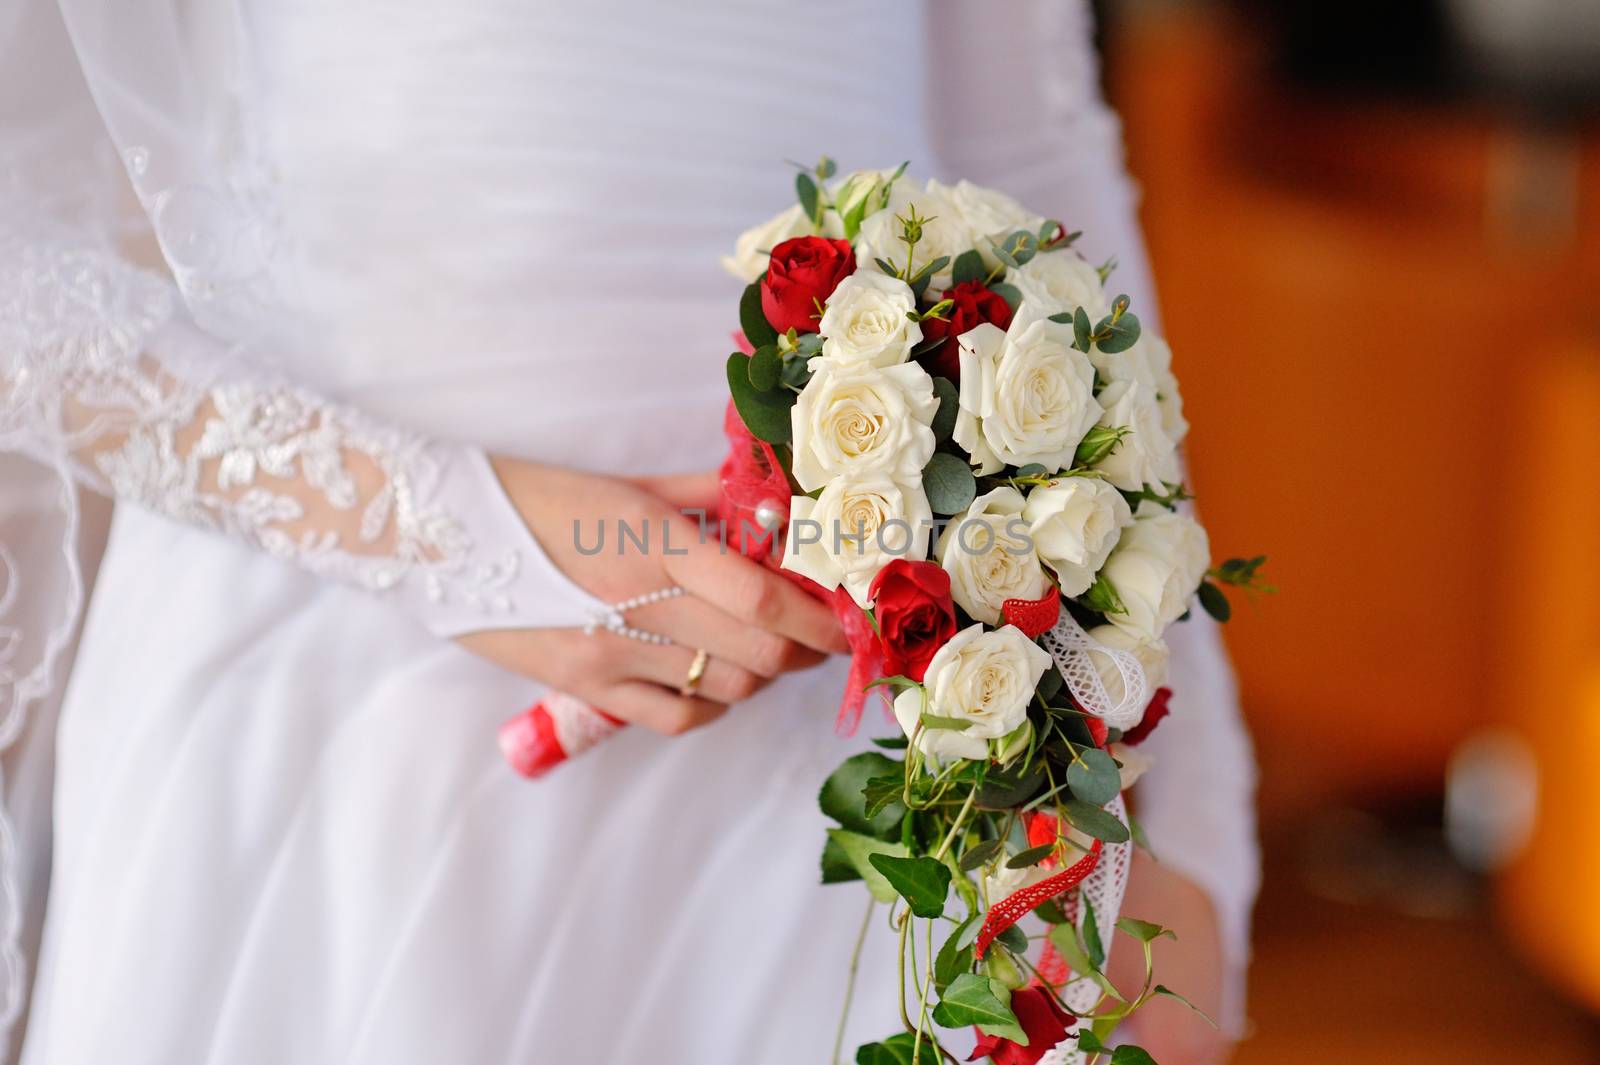 beautiful wedding bouquet with white rose at bride's hands.